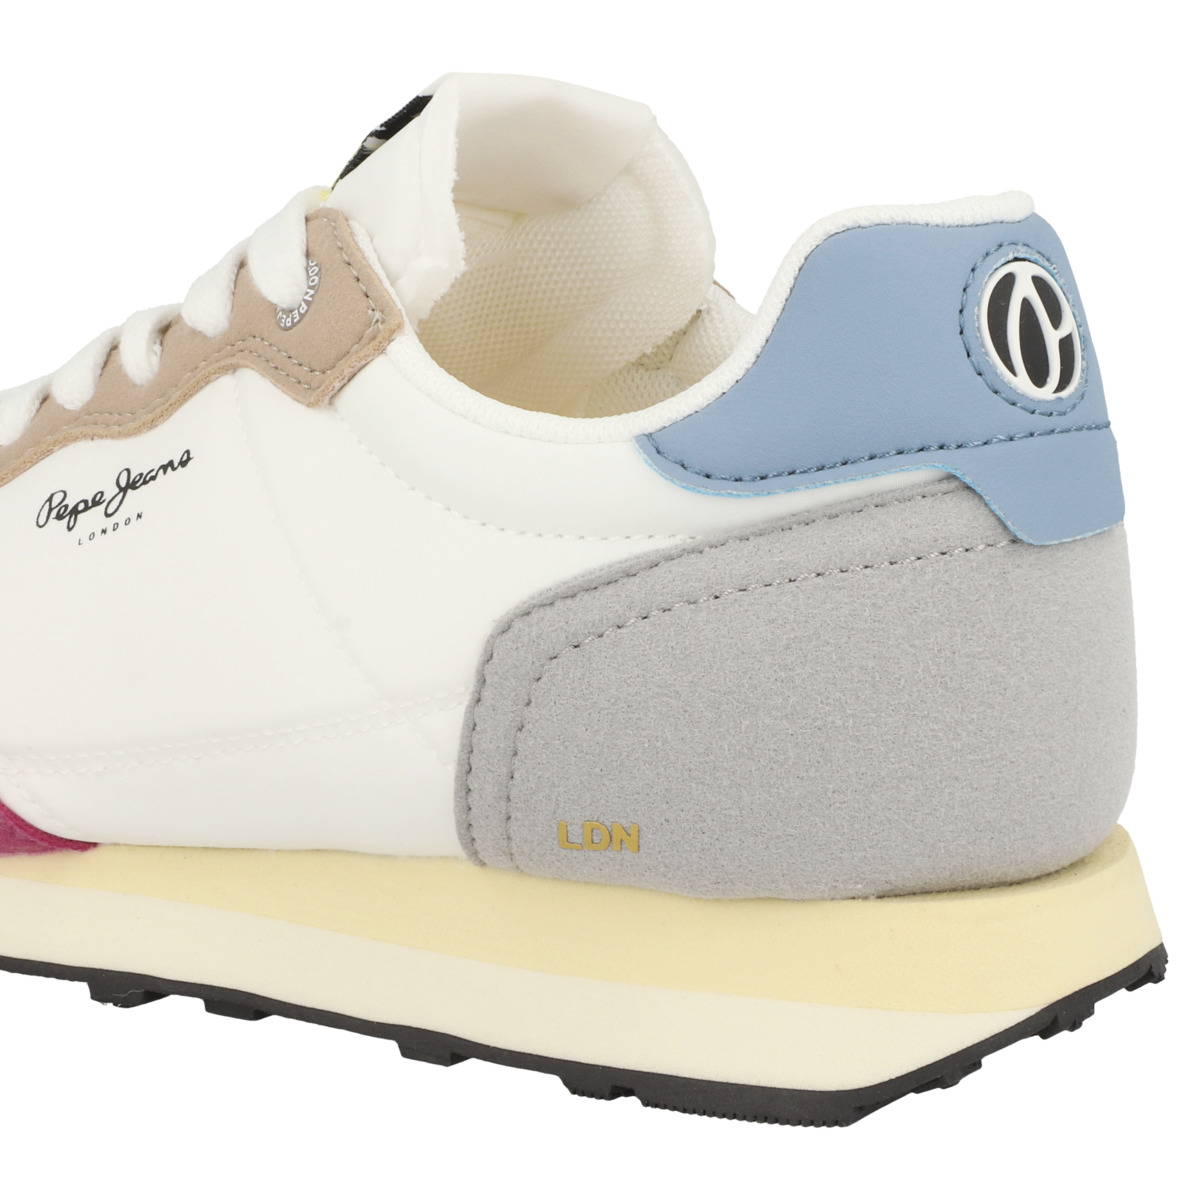 Pepe Jeans Natch Basic W Sneaker multicolor